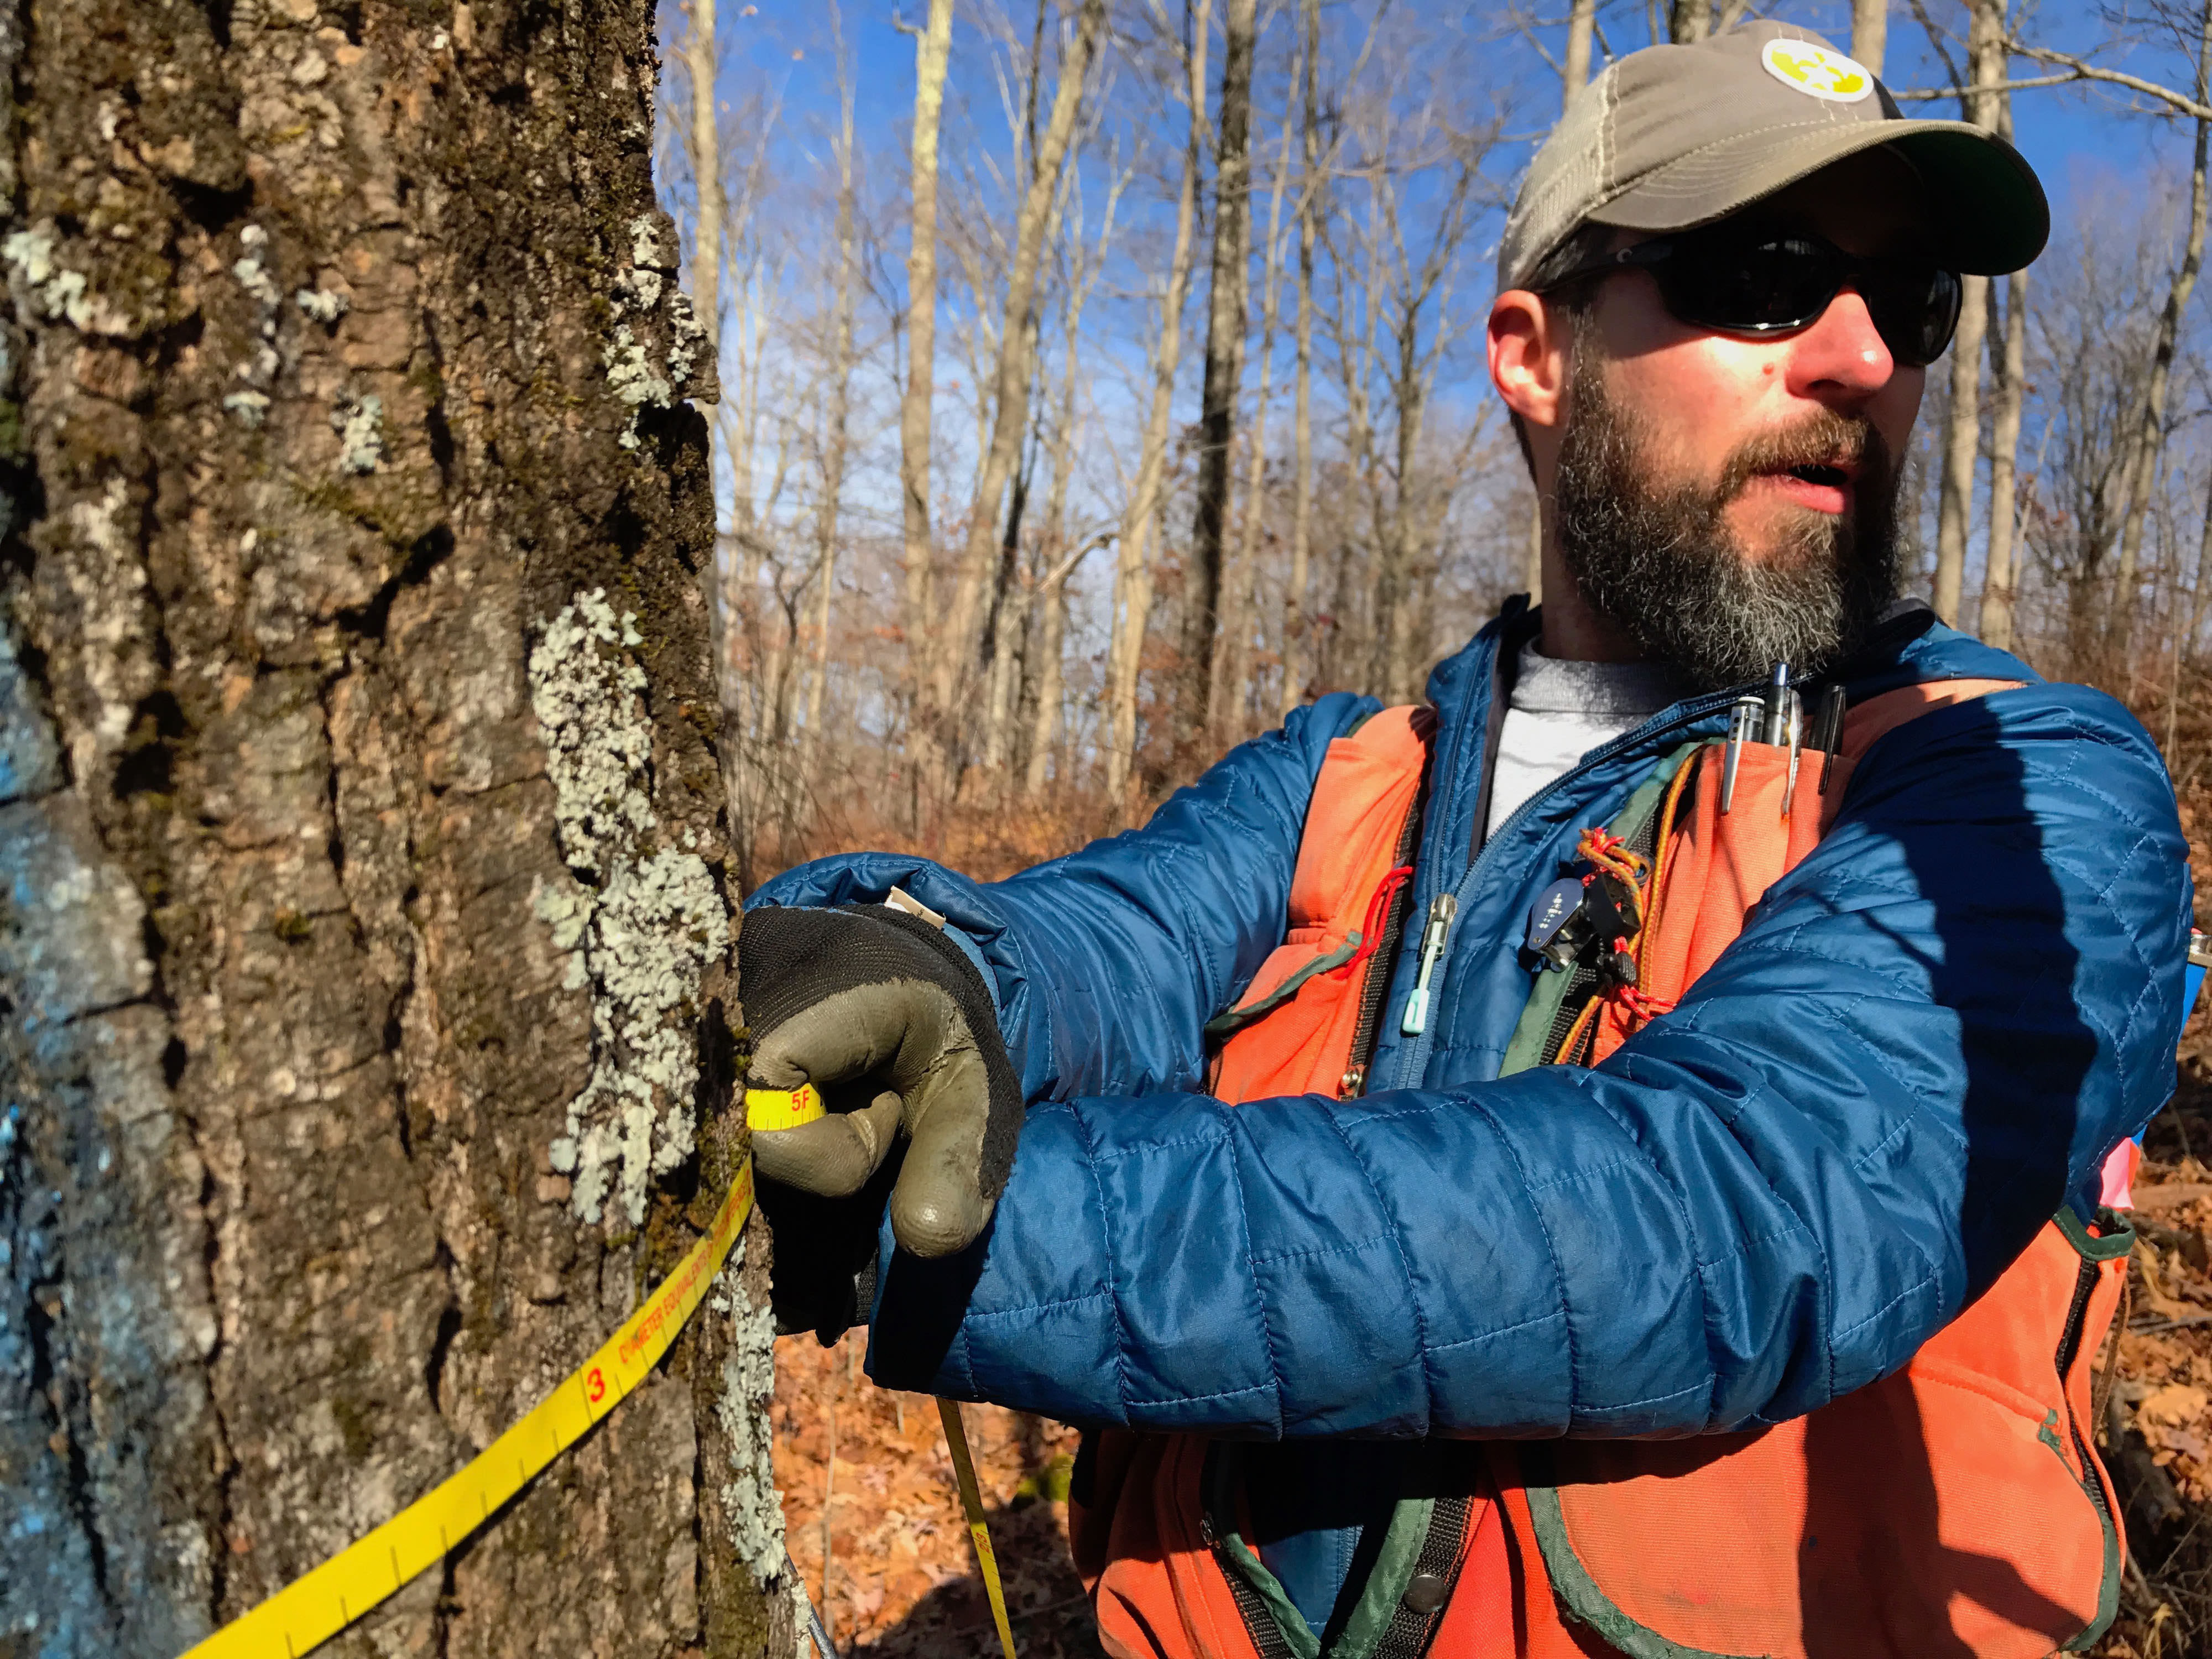 A man wearing a blue jacket and orange vest uses a narrow yellow tape measure to measure the circumference of a tree in a forest.